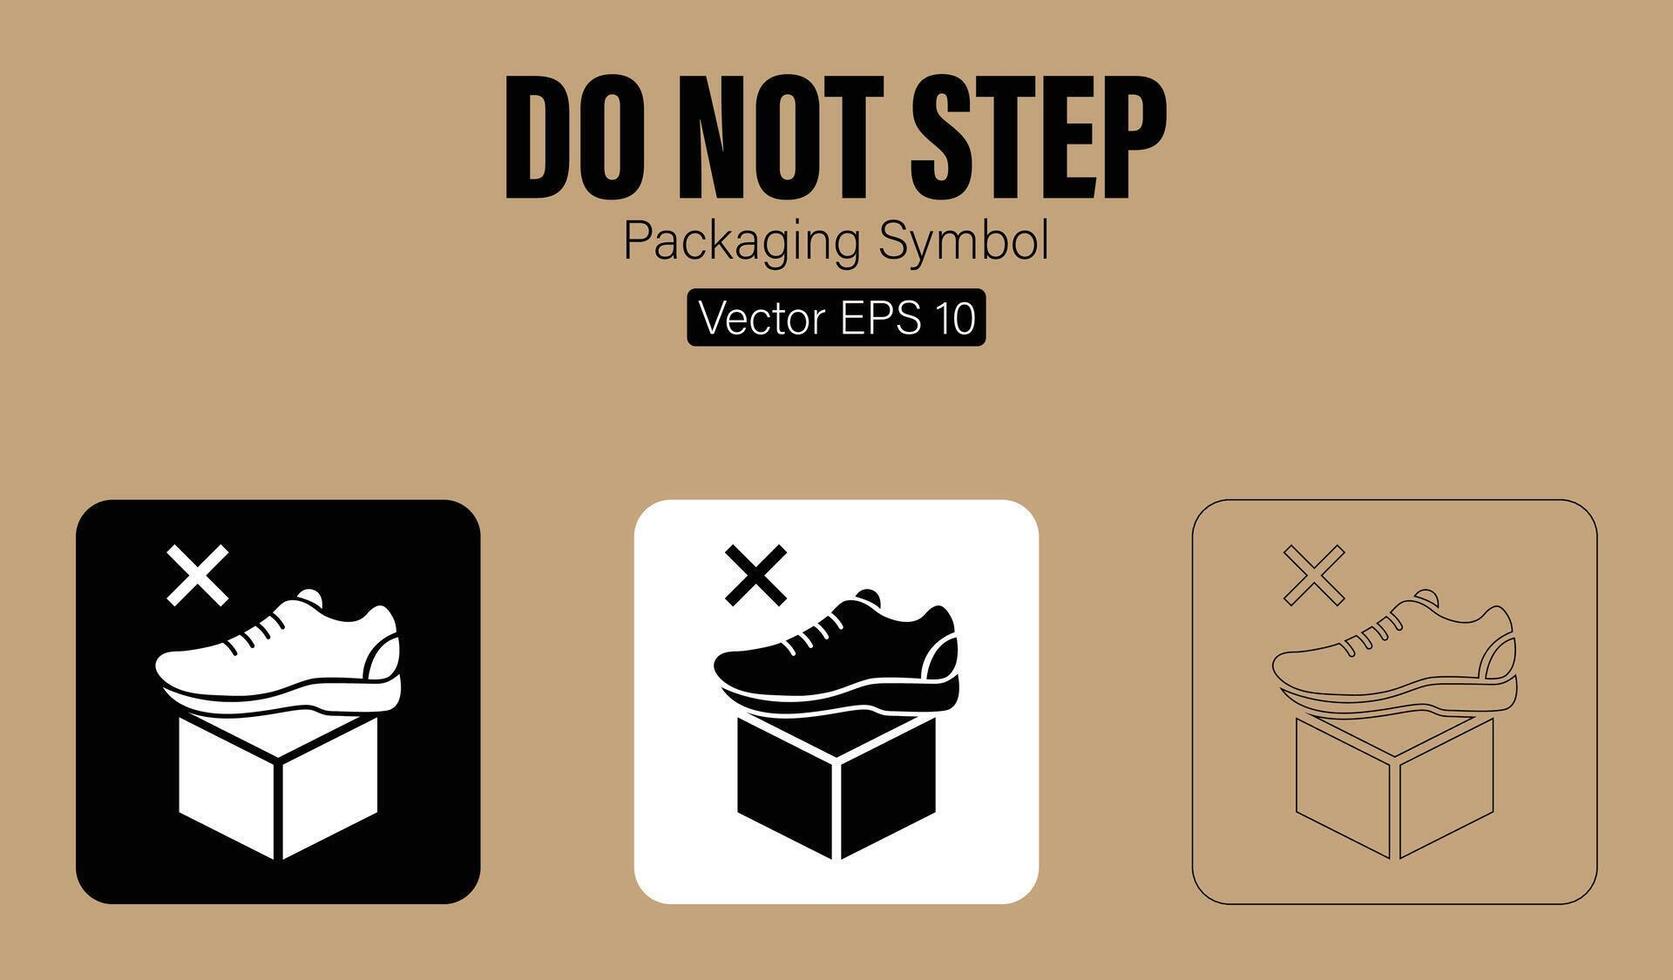 Do Not Step Packaging Symbol vector